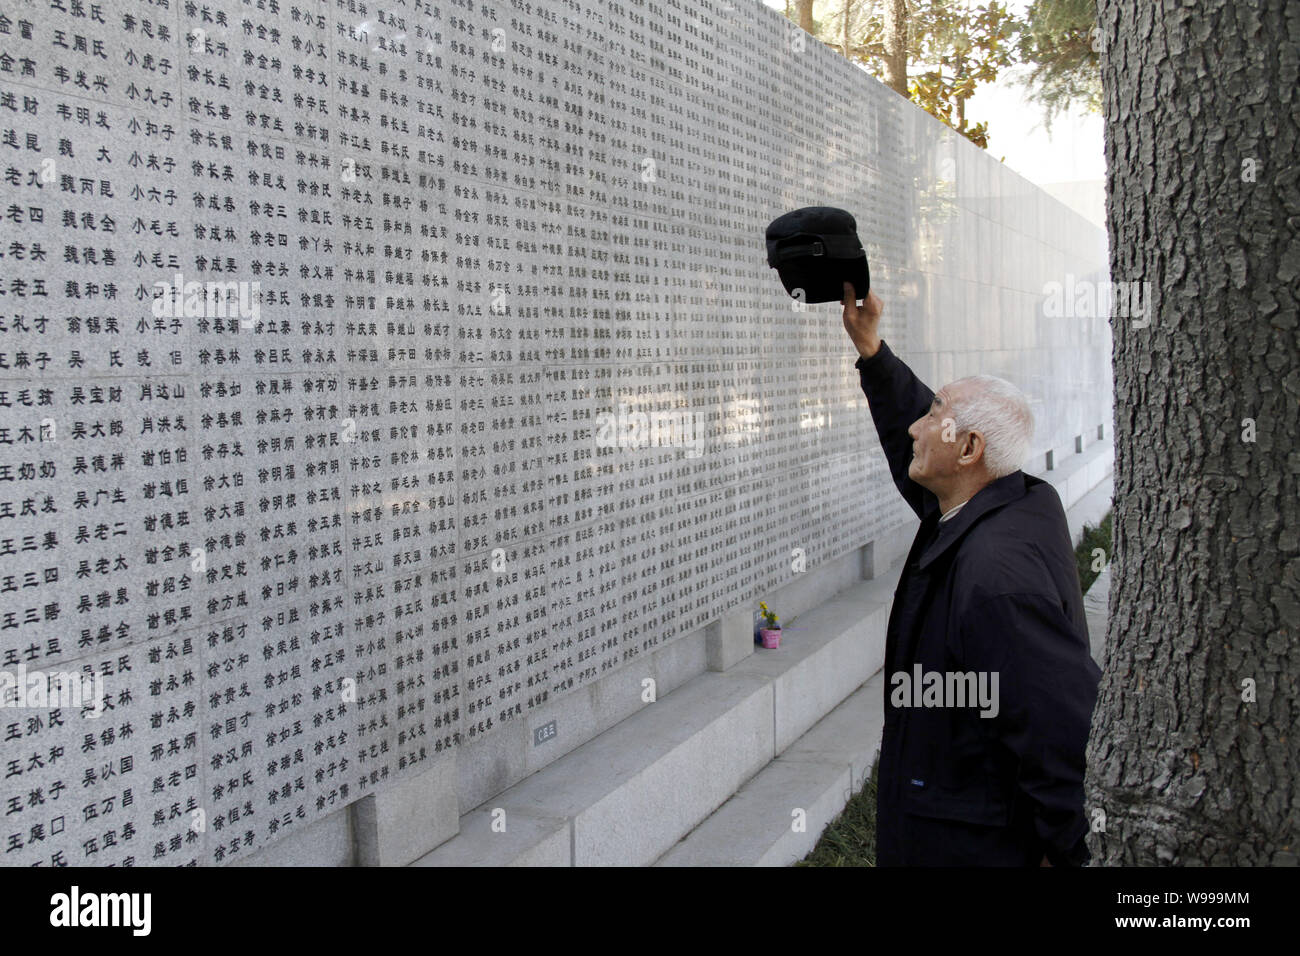 Nanjing Massacre survivor Xu Qingen, 79, looks for the name of his brother Xu Qingrong among the newly-carved victims names on the Wailing Wall of the Stock Photo